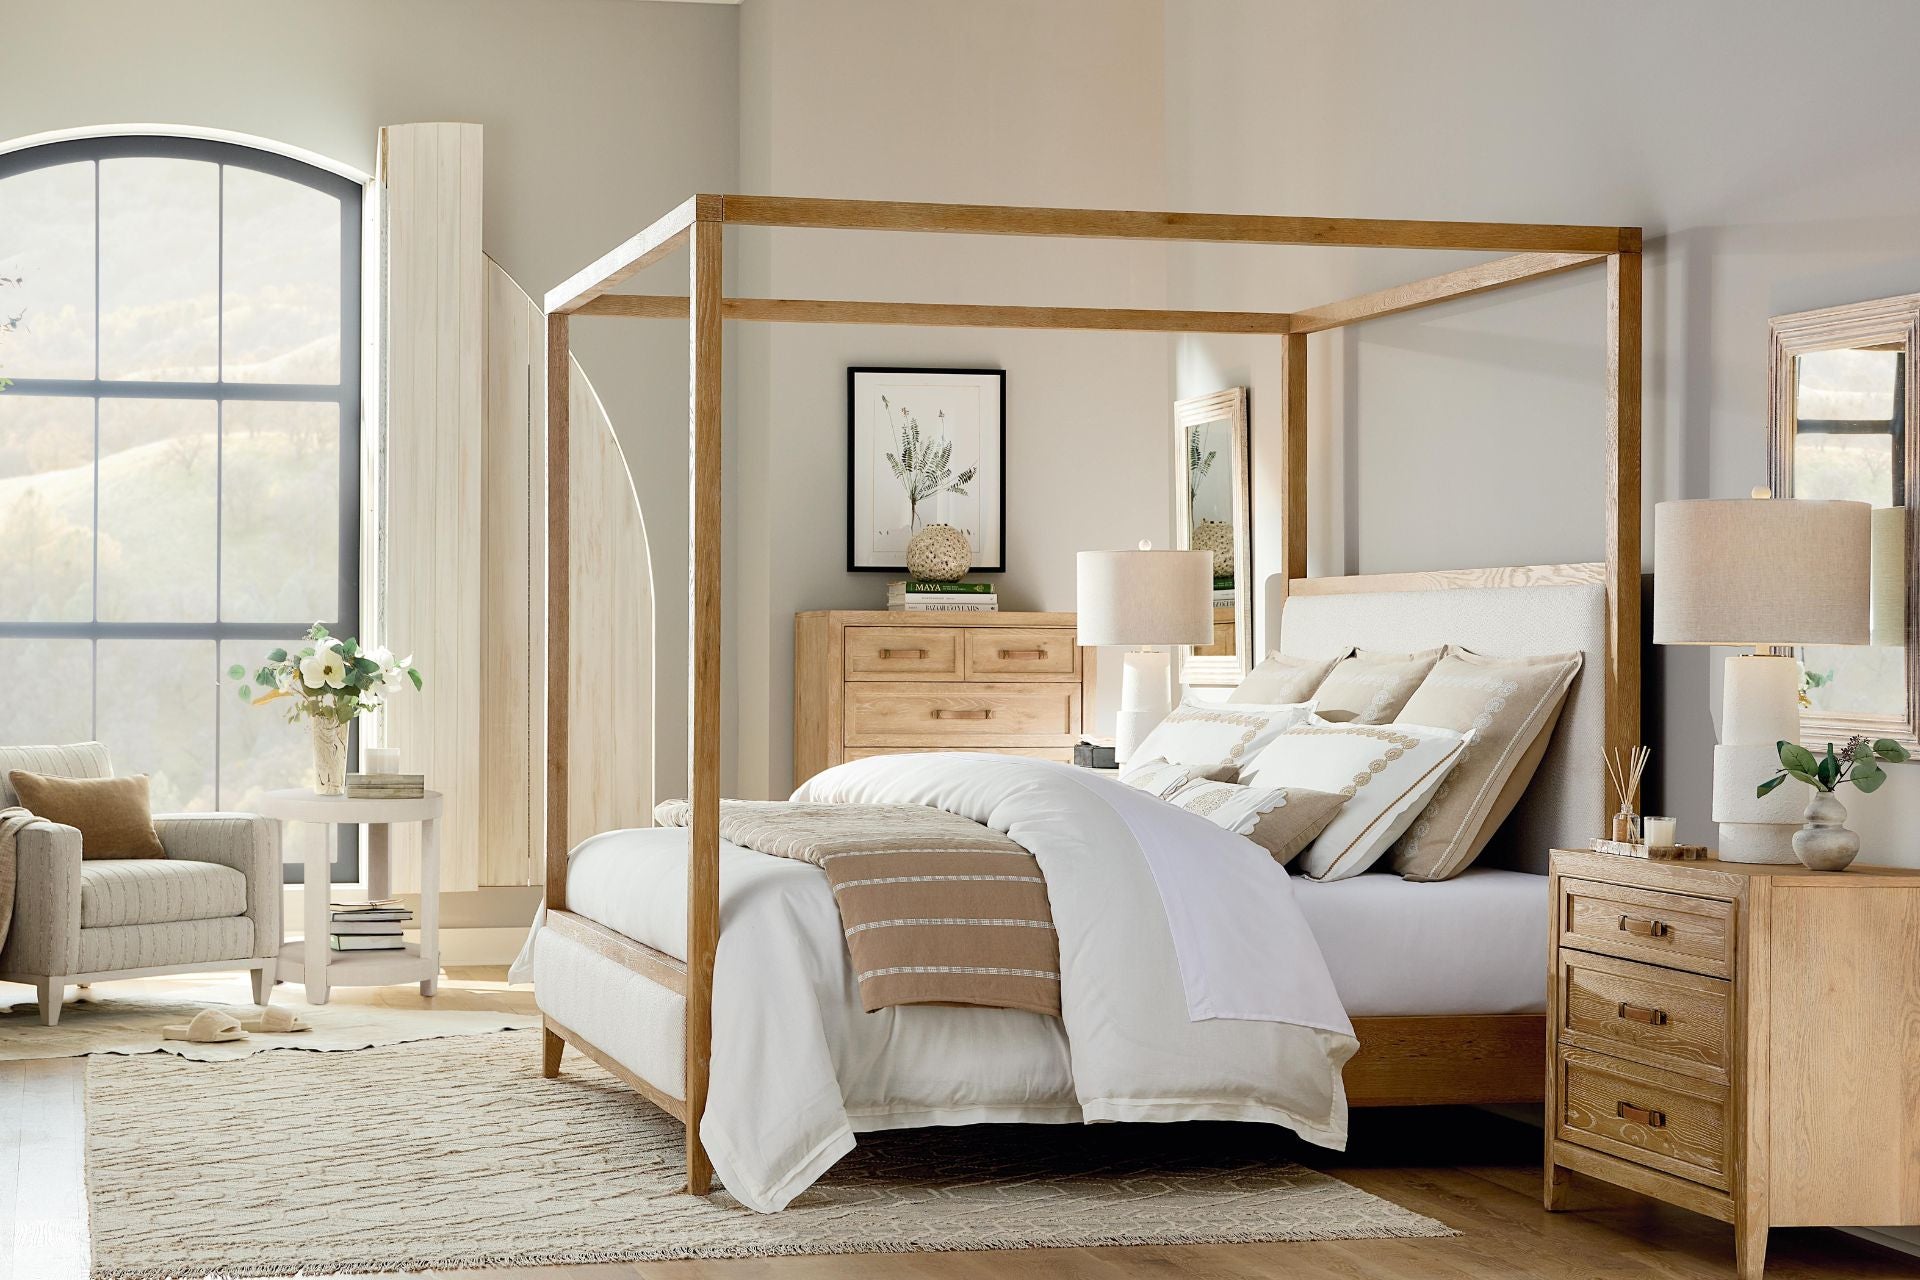 The Ultimate Guide on How to Mix and Match Bedroom Furniture